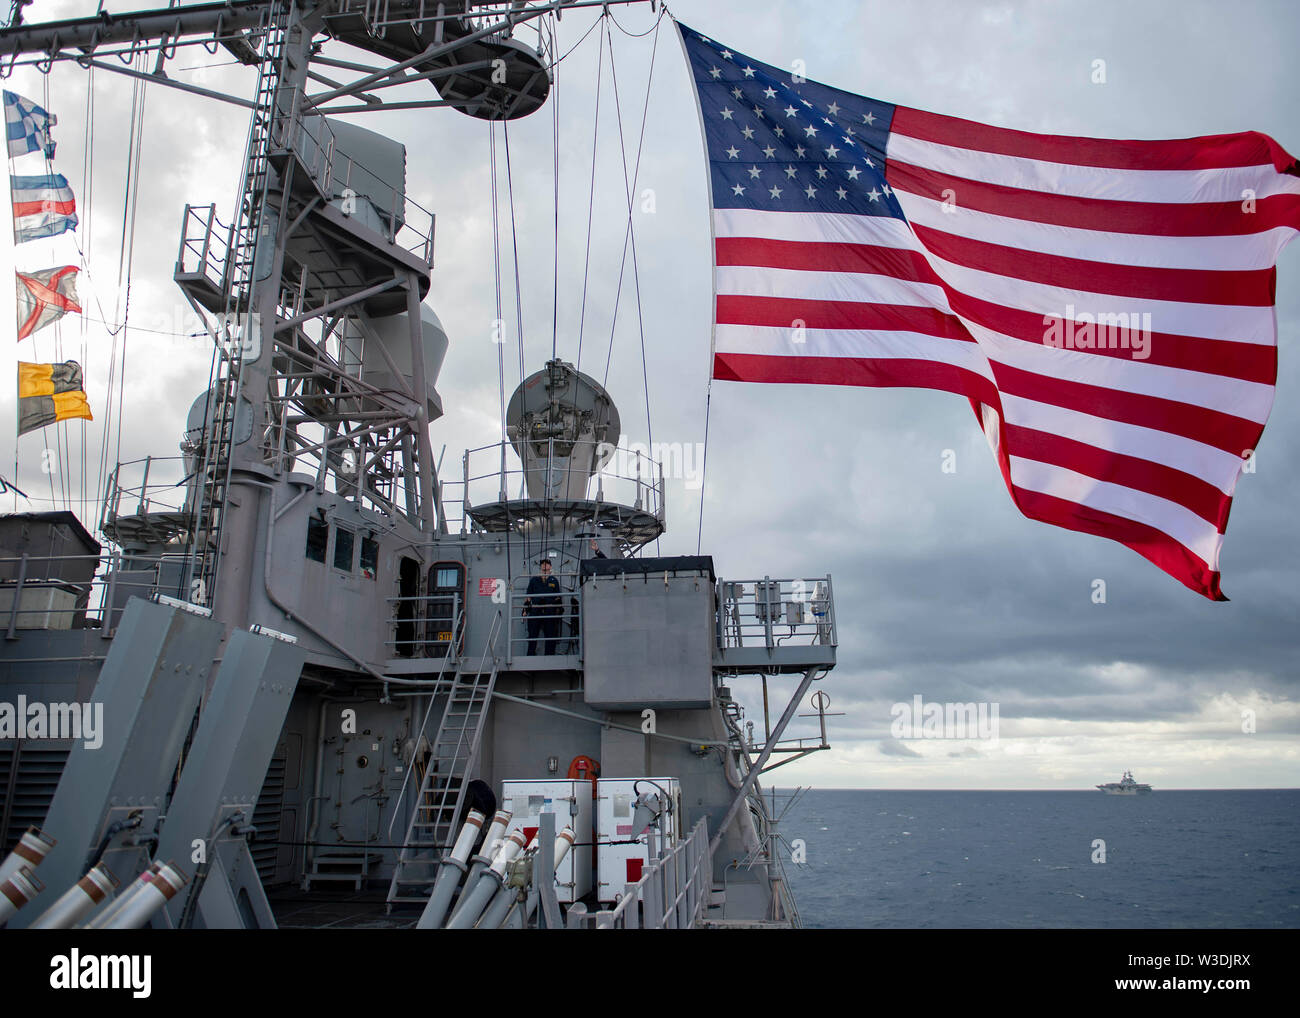 190711-N-WK982-2110 CORAL SEA (July 11, 2019) The crew of the Ticonderoga-class guided-missile cruiser USS Chancellorsville (CG 62) maneuvers into formation during Talisman Sabre 2019. Talisman Sabre 2019 illustrates the closeness of the Australian and U.S. alliance and the strength of the military-to-military relationship. This is the eighth iteration of this exercise. (U.S. Navy photo by Mass Communication Specialist 2nd Class John Harris/Released) Stock Photo